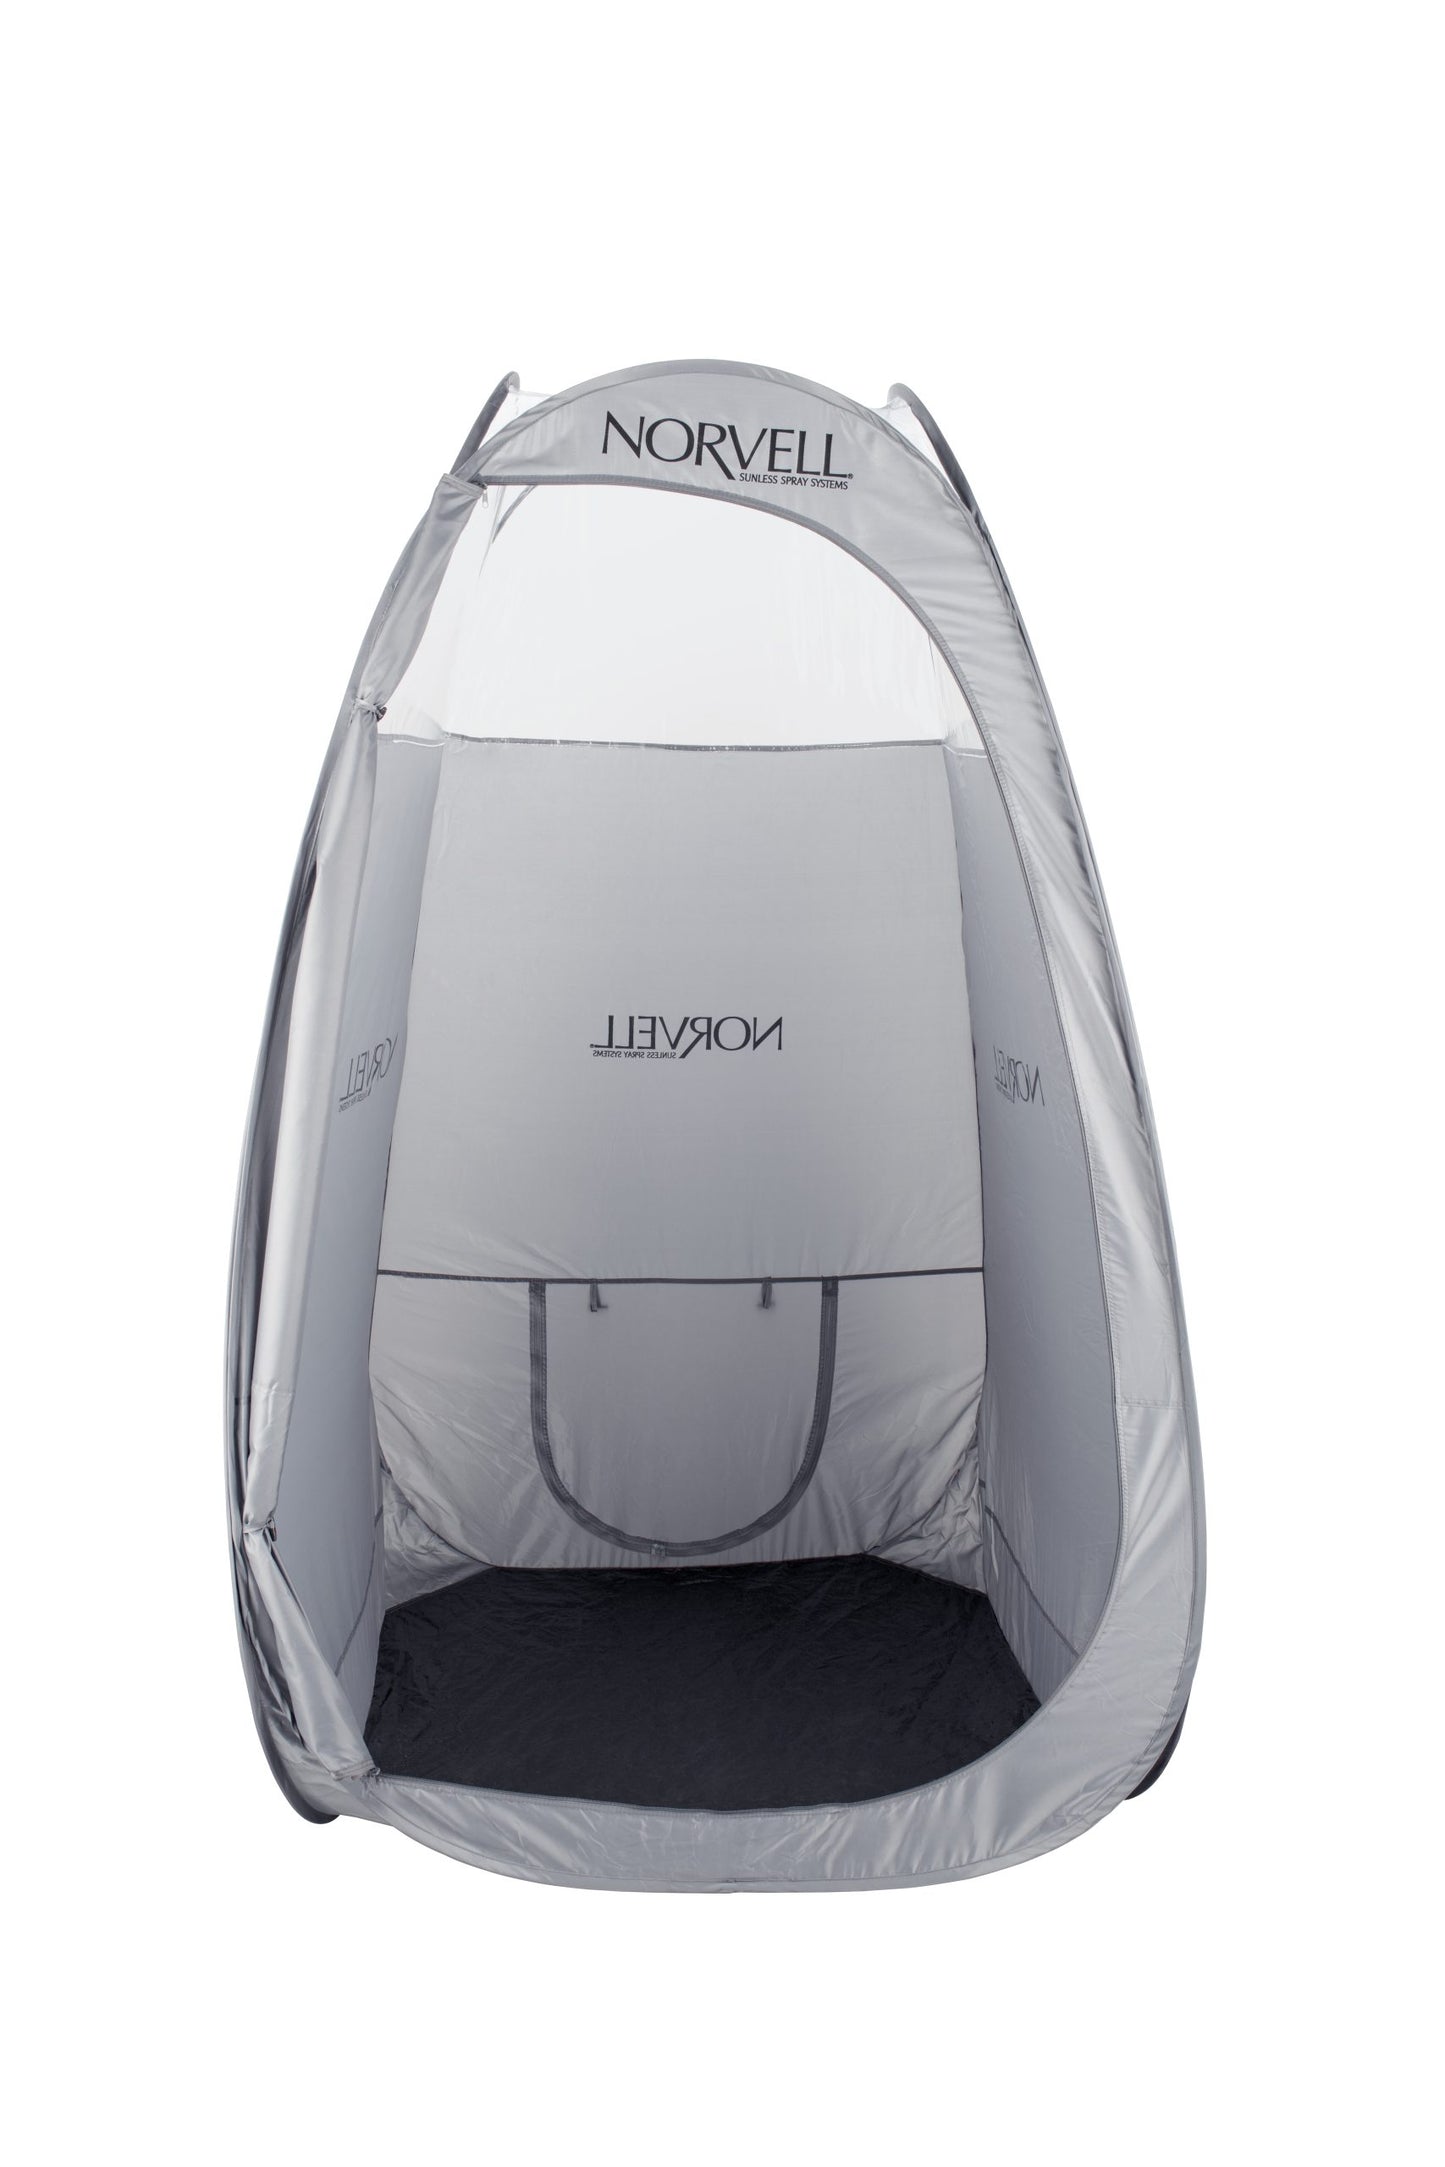 Norvell Mobile Pop-Up Tent w/Travel Bag